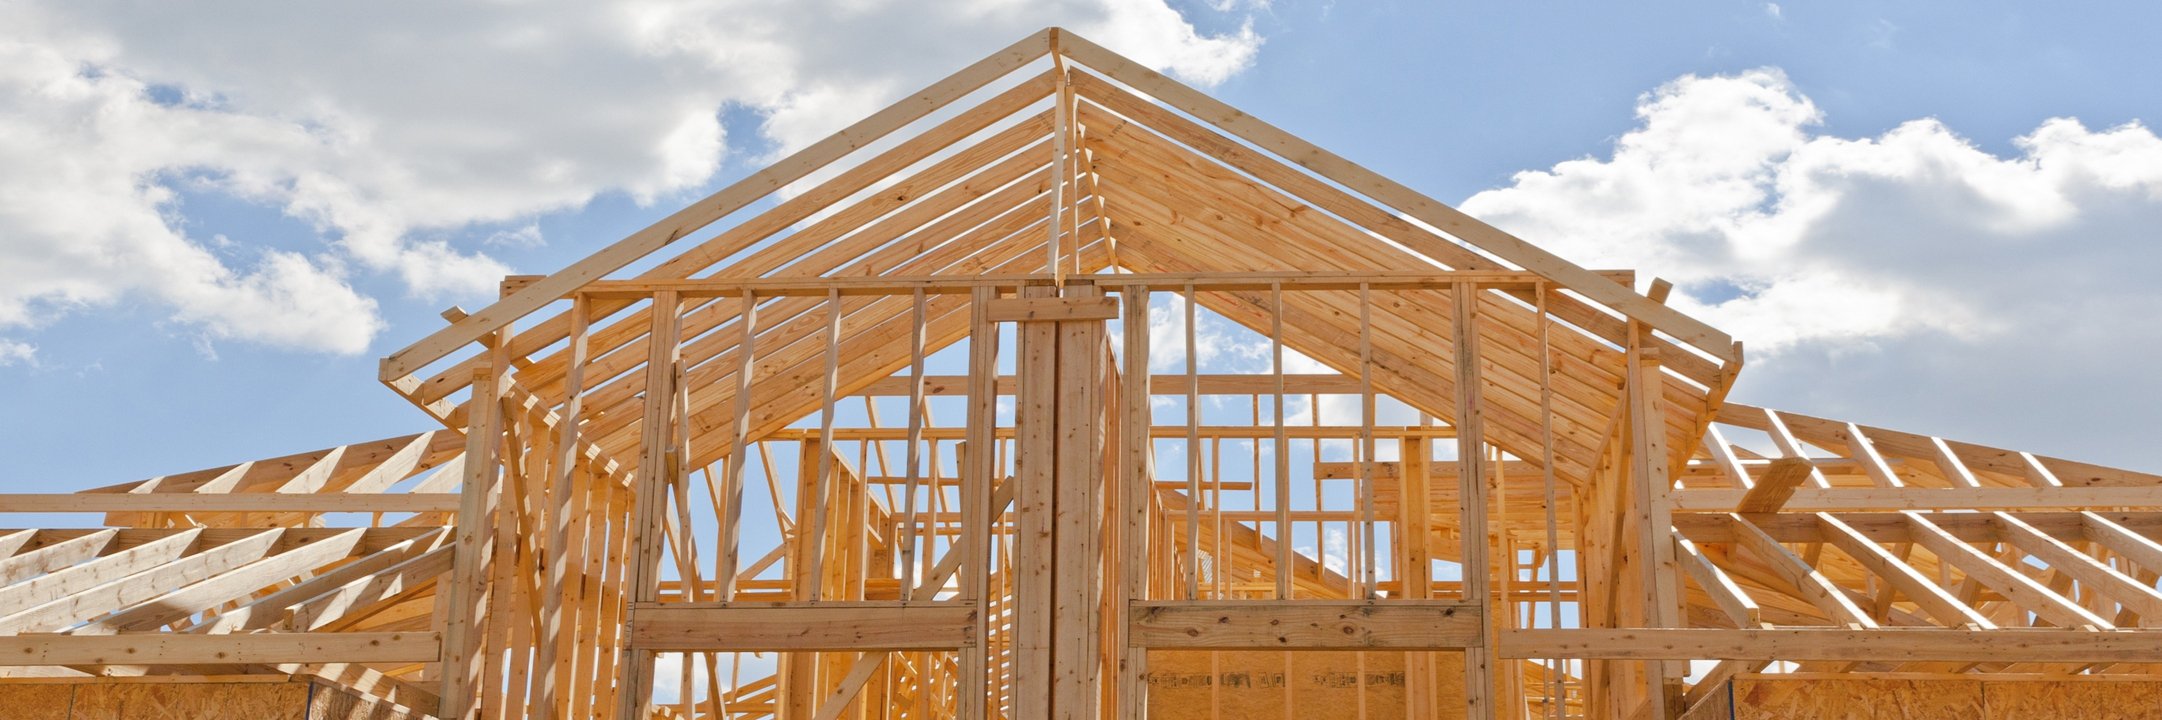 HMB Interview: Finding the Right Financing for Your Single Family New Construction Builds